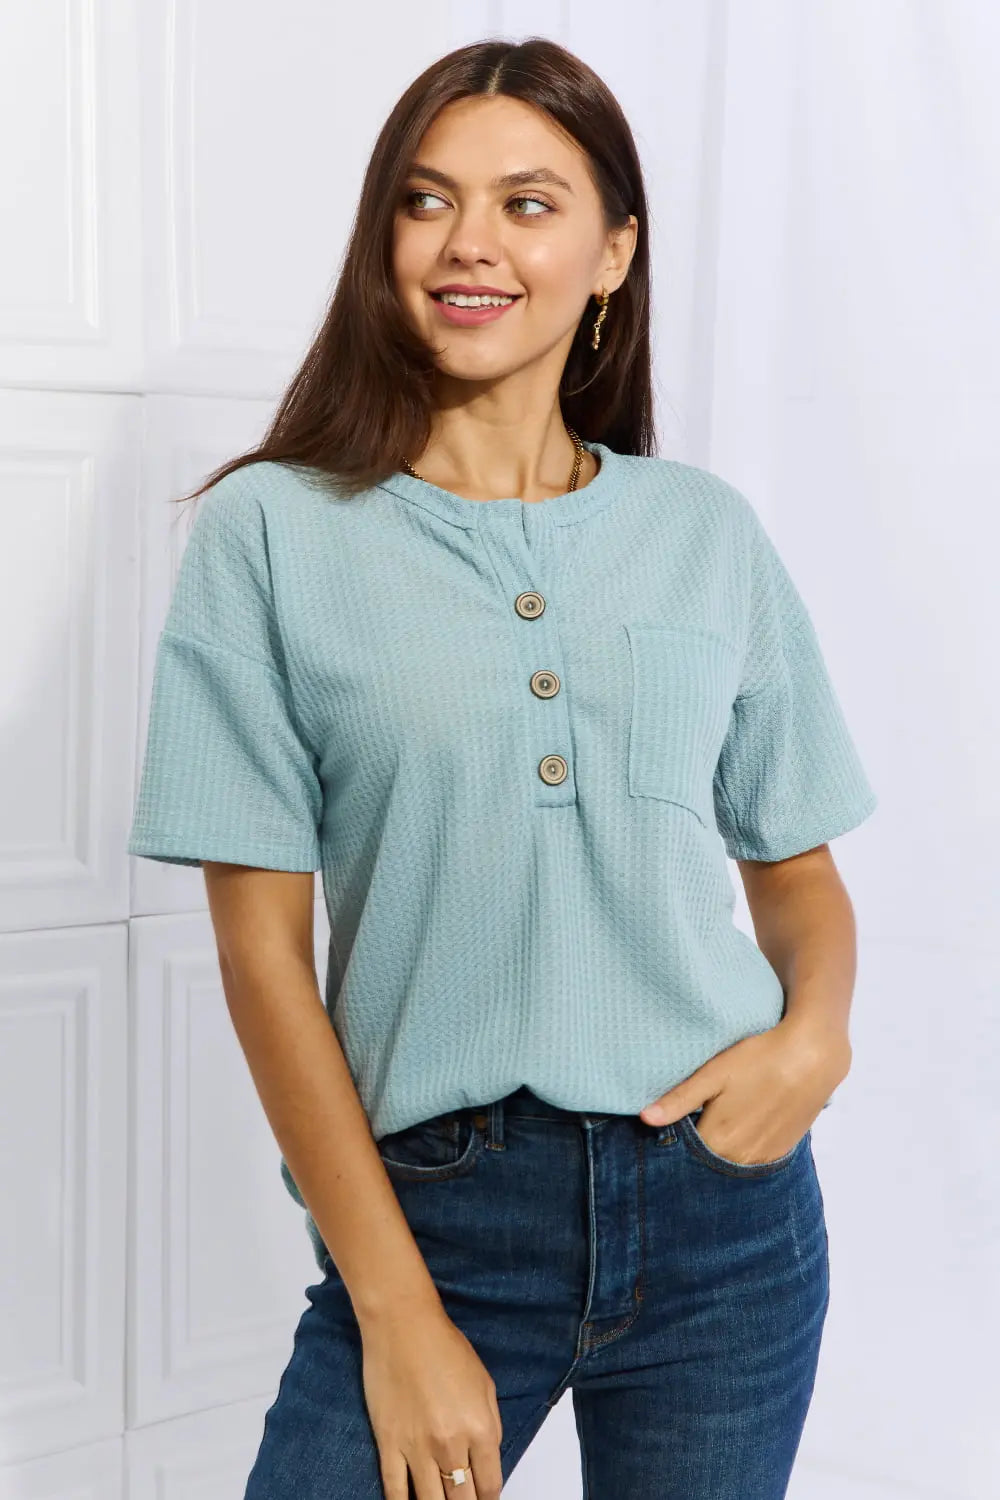 Heimish Made For You Full Size 1/4 Button Down Waffle Top in Blue Trendsi